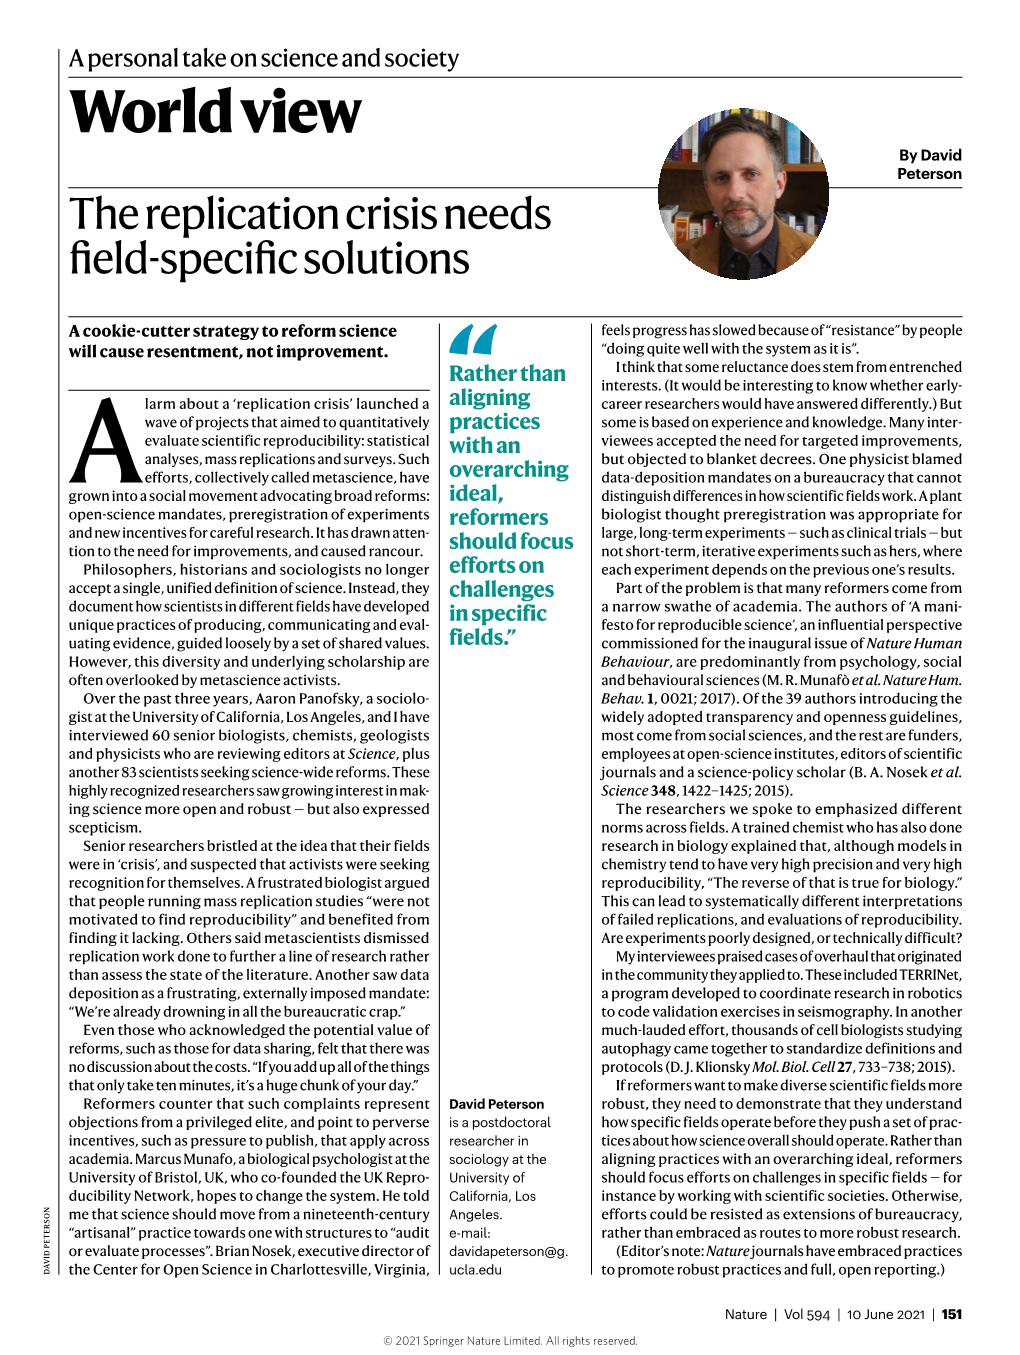 World View by David Peterson the Replication Crisis Needs Field-Specific Solutions